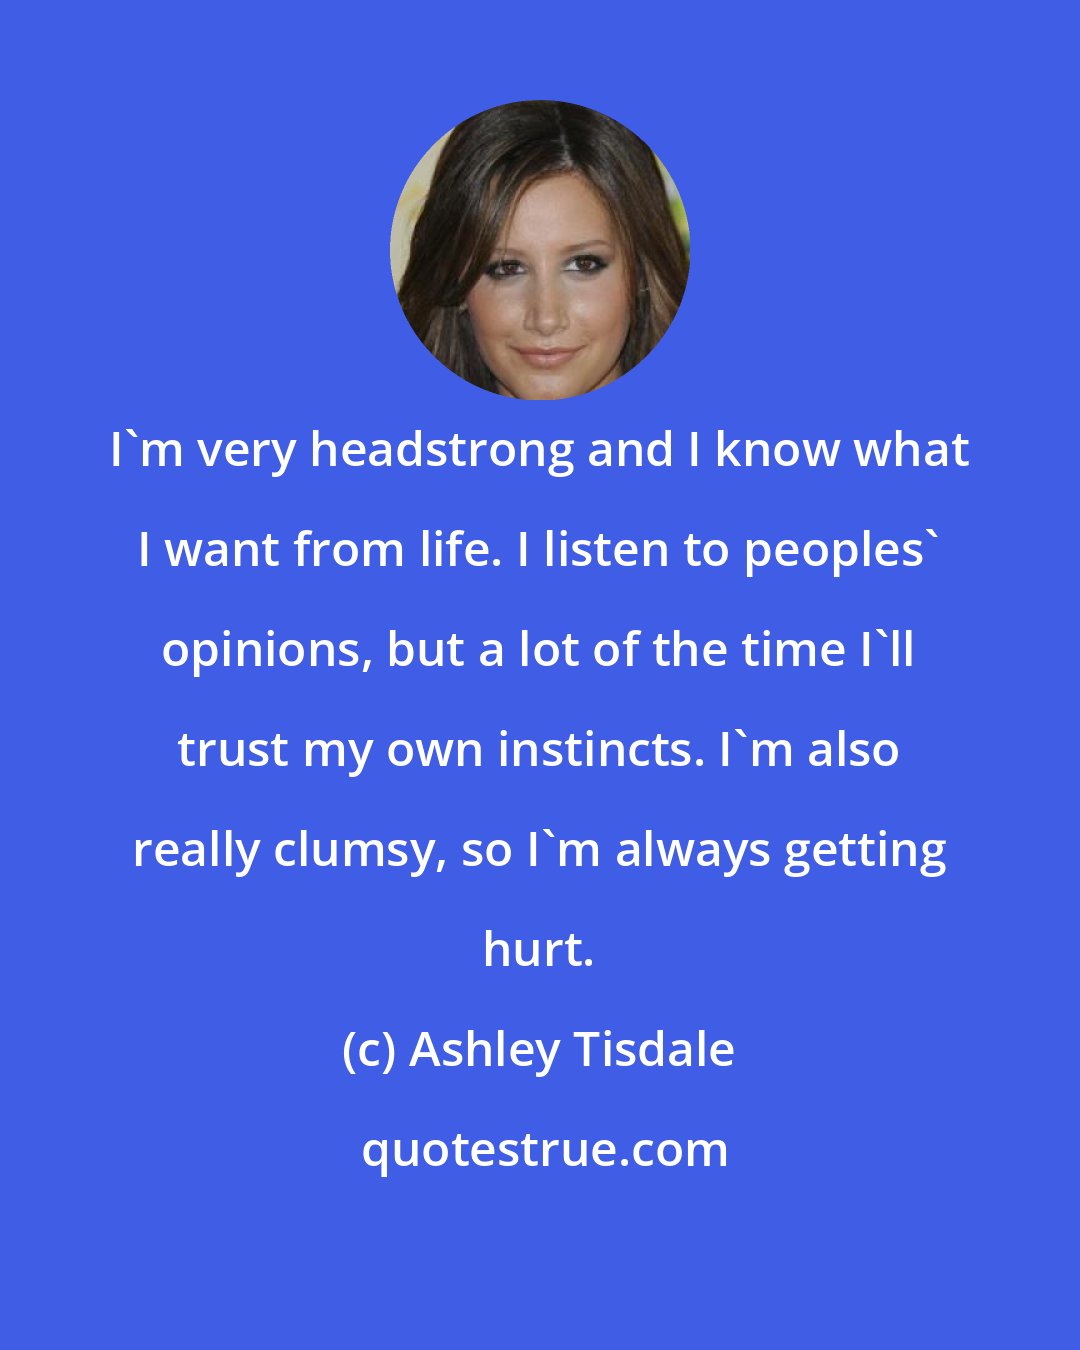 Ashley Tisdale: I'm very headstrong and I know what I want from life. I listen to peoples' opinions, but a lot of the time I'll trust my own instincts. I'm also really clumsy, so I'm always getting hurt.